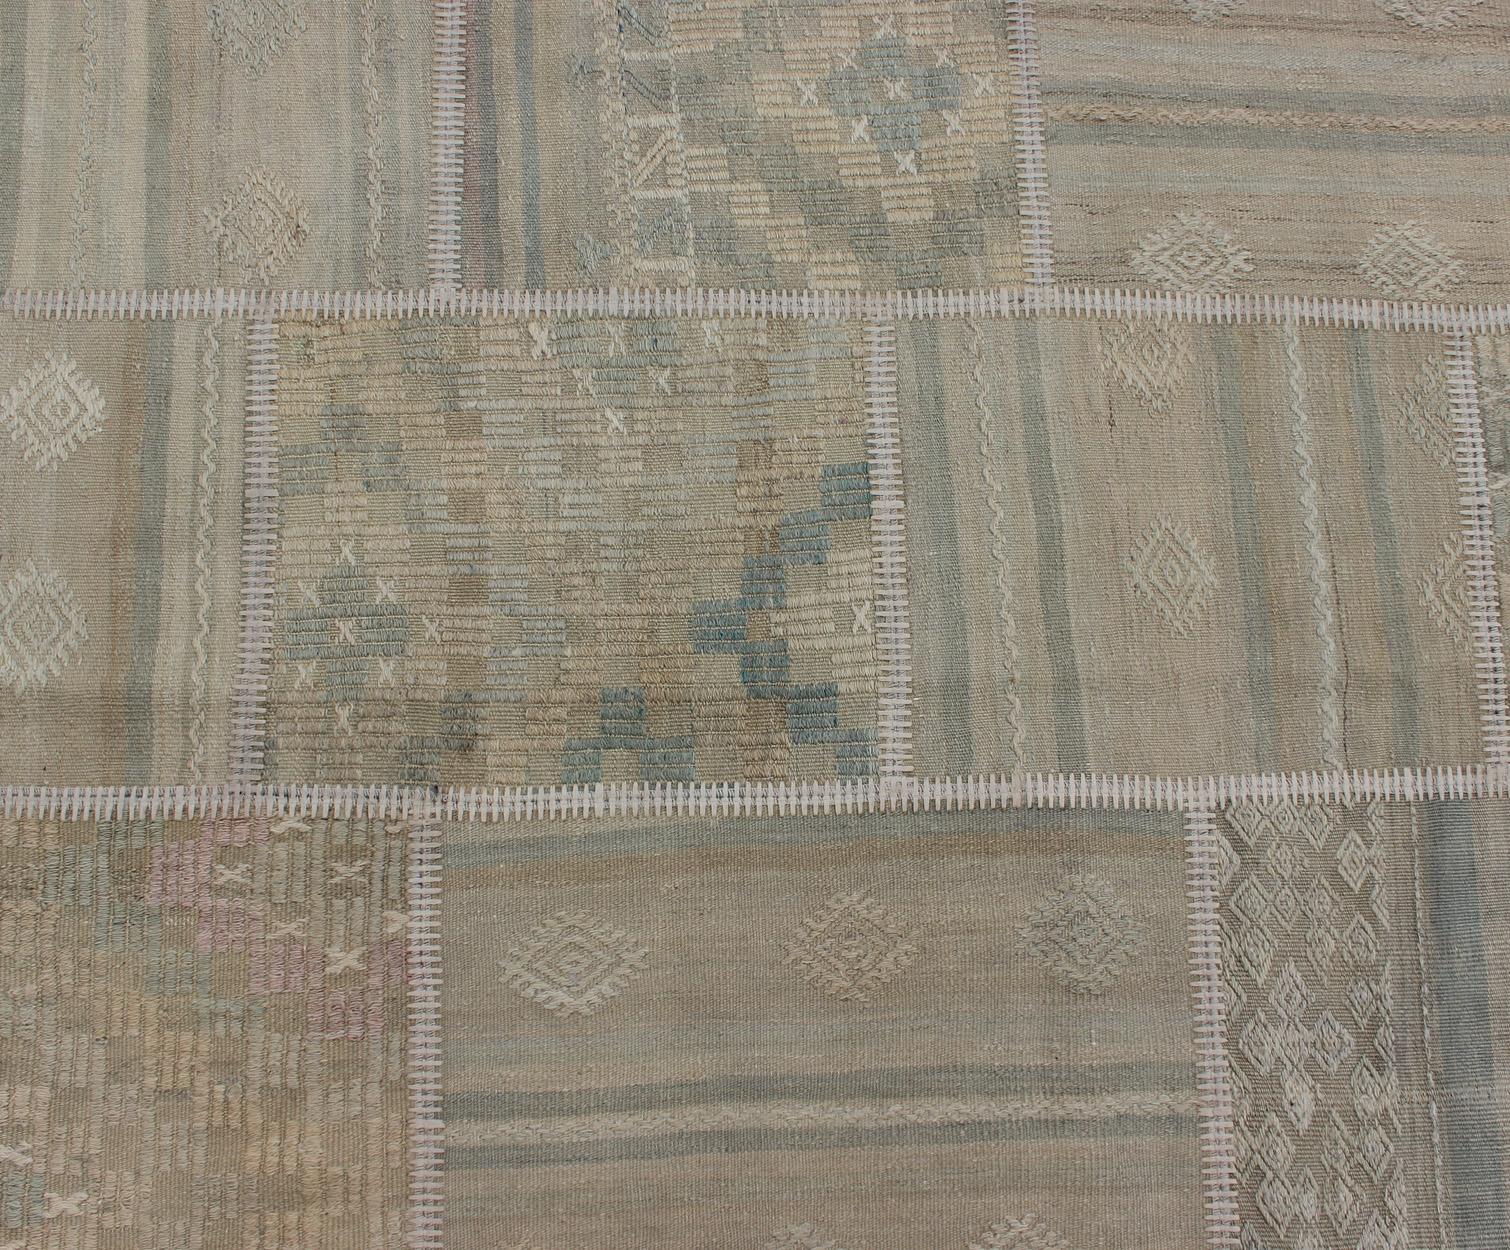 Wool Large Turkish Kilim in Tan, Blue, Taupe, Light Green & Neutral Colors For Sale